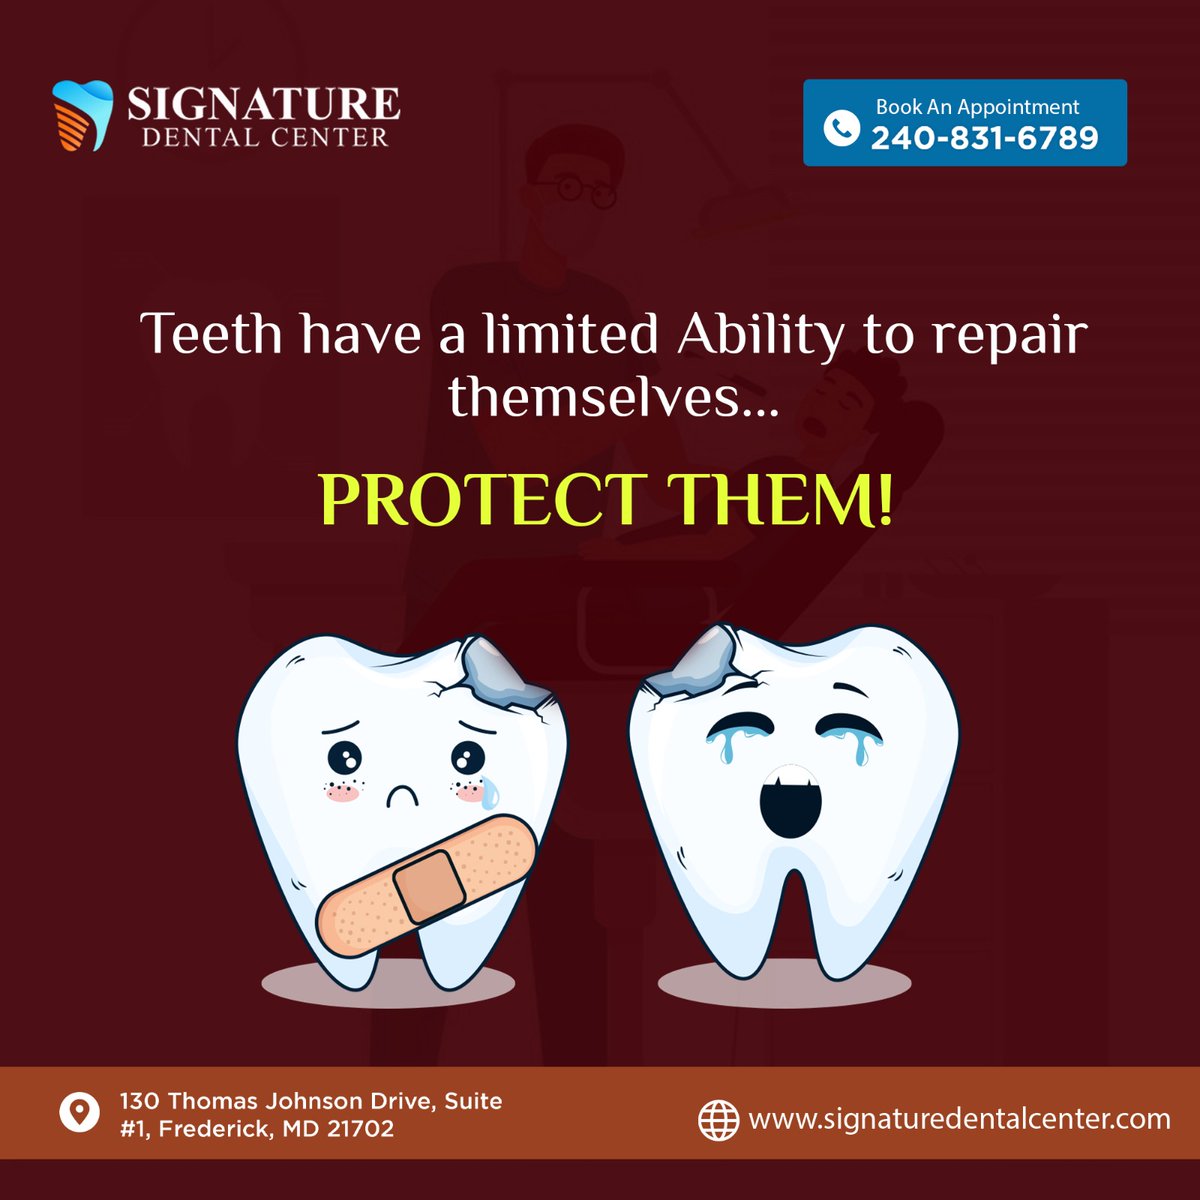 'Protect your teeth as they have a limited ability to self-repair.'
.
For appointments, call or text: +1240-831-6789
Or Visit: signaturedentalcenter.com
.
#Dentalcheckups #Pediatricdentistry #toothextraction
#teethwhitening #straighteningteeth  #dentalbonds 
#dentaltreatment